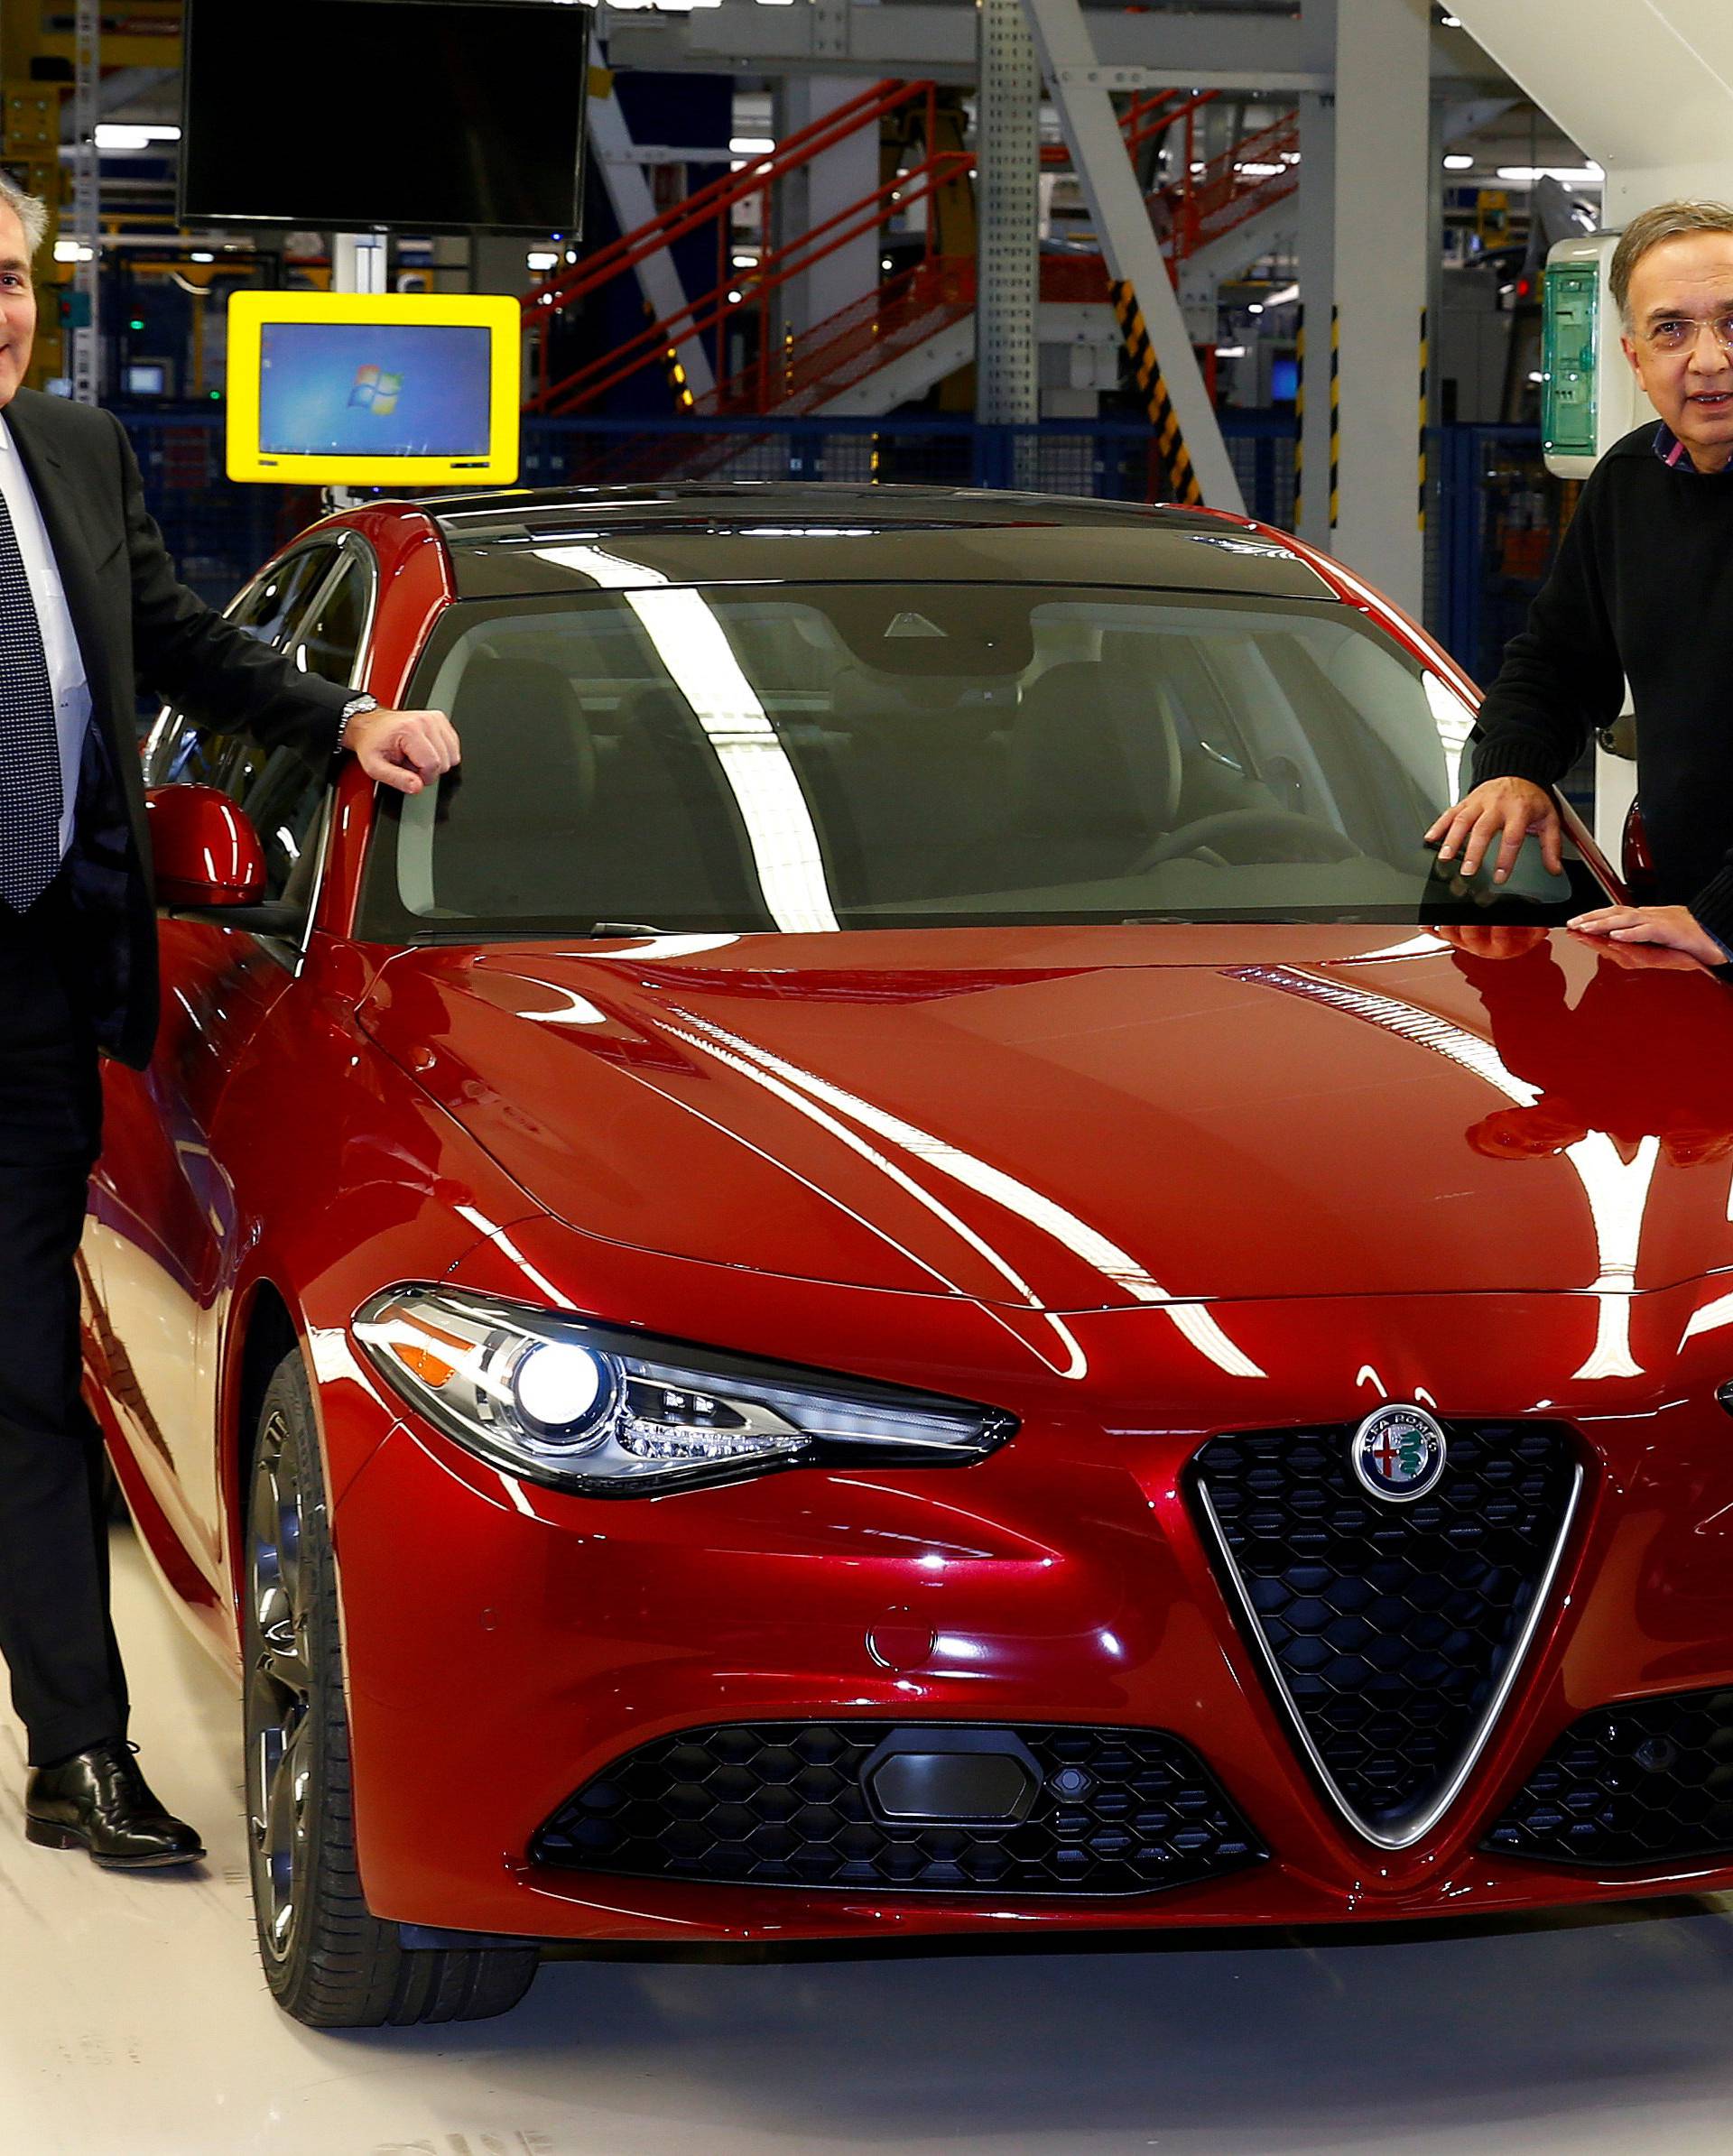 FILE PHOTO: FCA CEO Sergio Marchionne and Alfredo Altavilla Chief Operating Officer EMEA pose next to the new Alfa Romeo car Giulia during an event at an FCA plant in Cassino